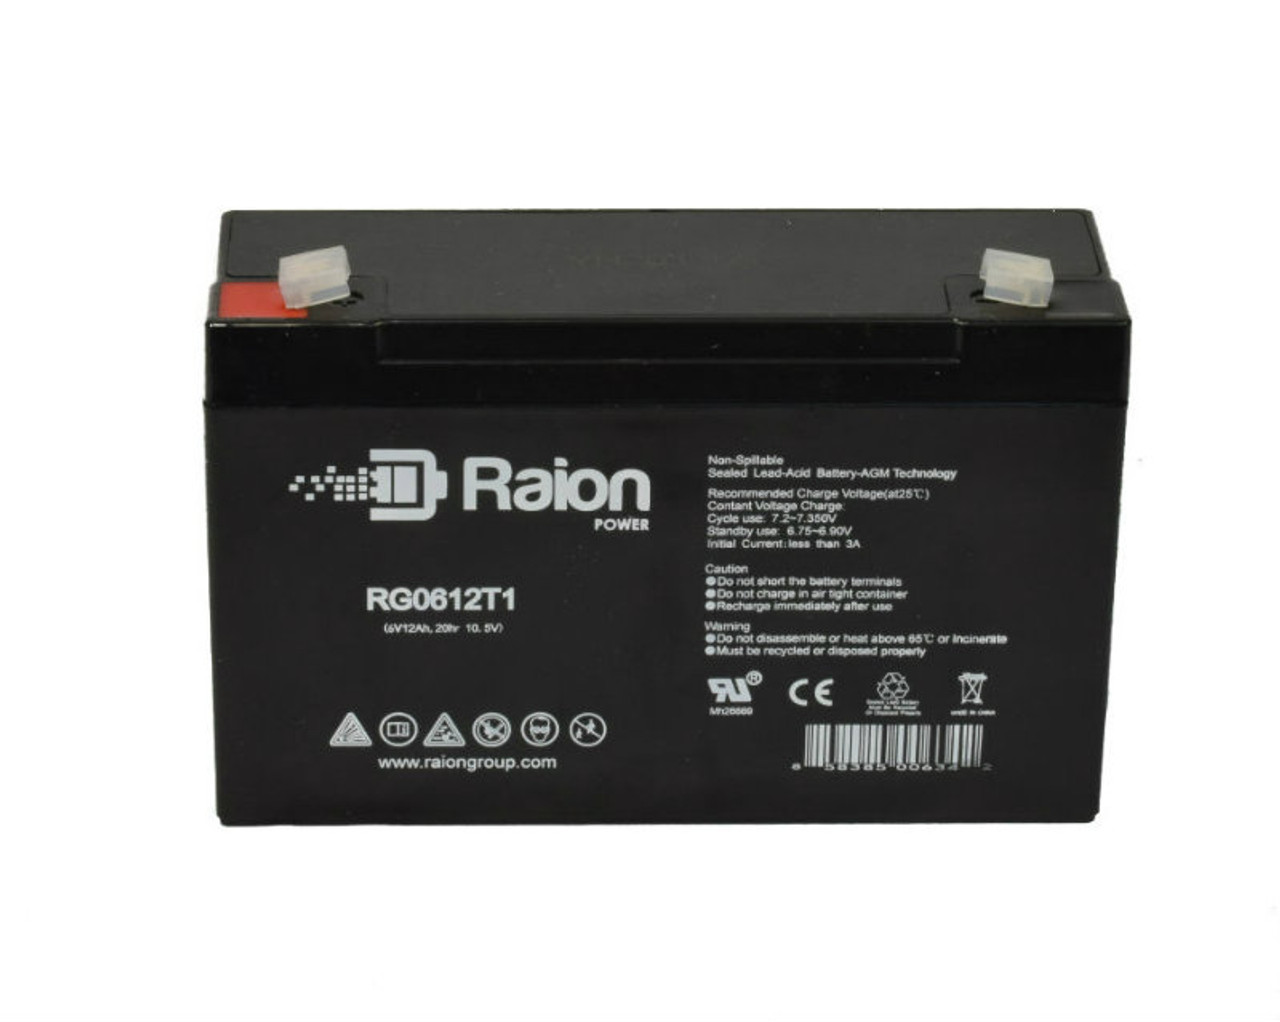 Raion Power RG06120T1 Replacement Battery Cartridge for APC SMART-UPS SU900